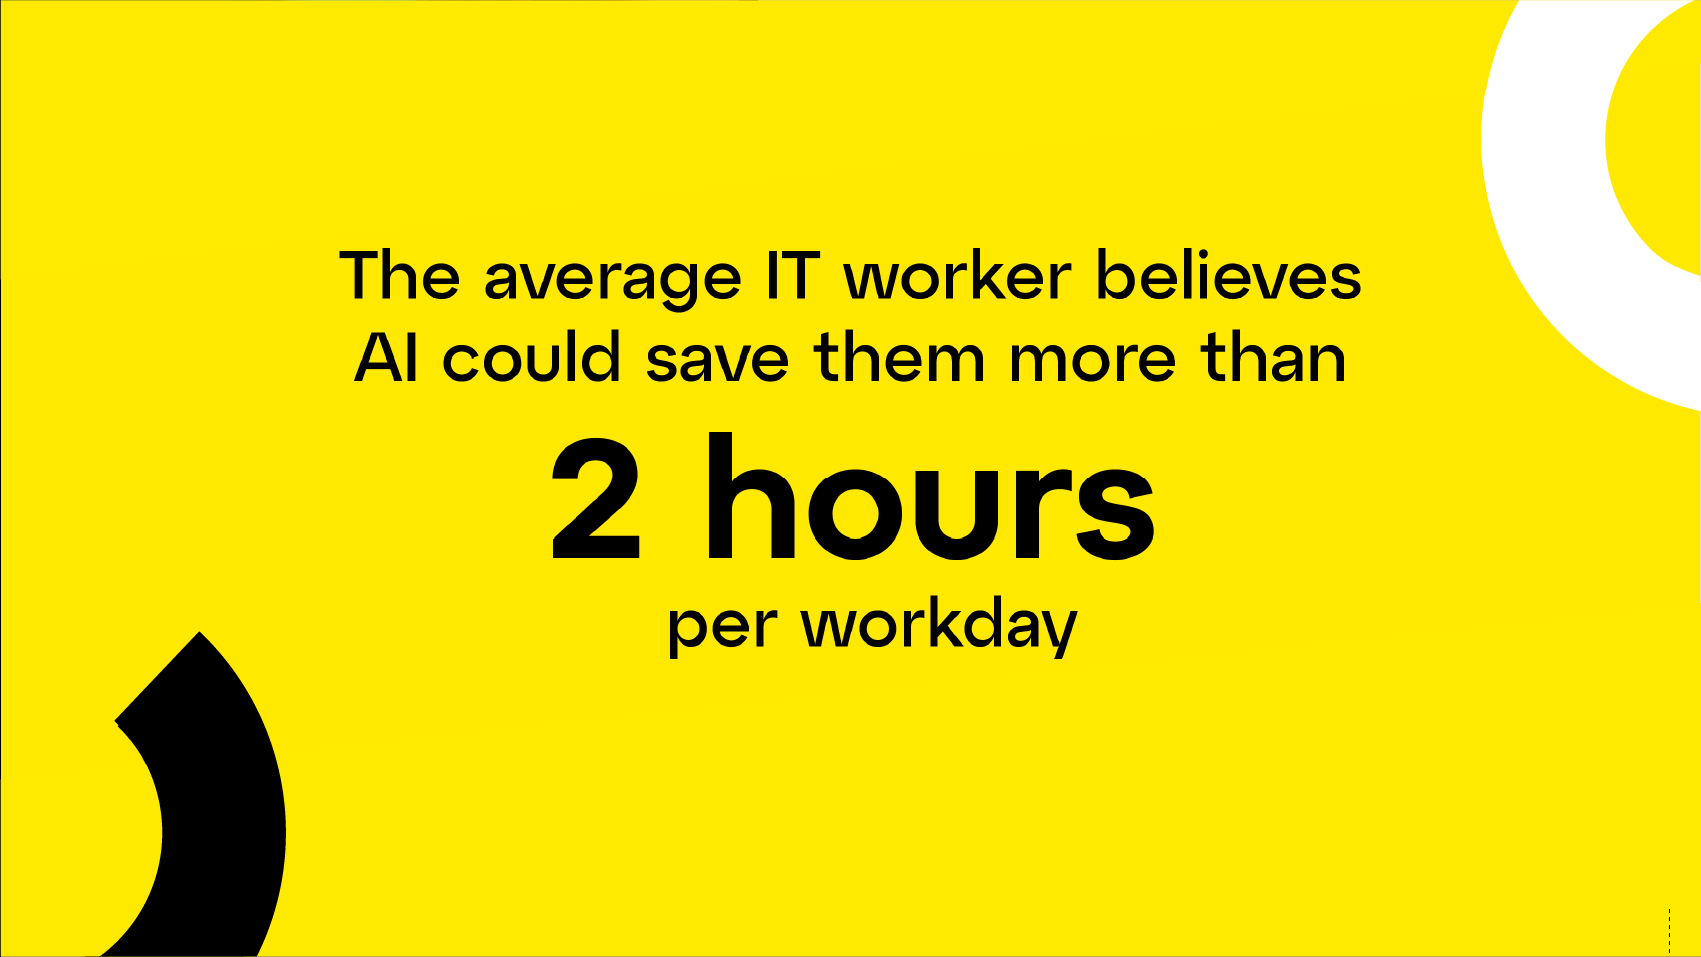 The average IT worker believes AI could save them more than 2 hours per workday.